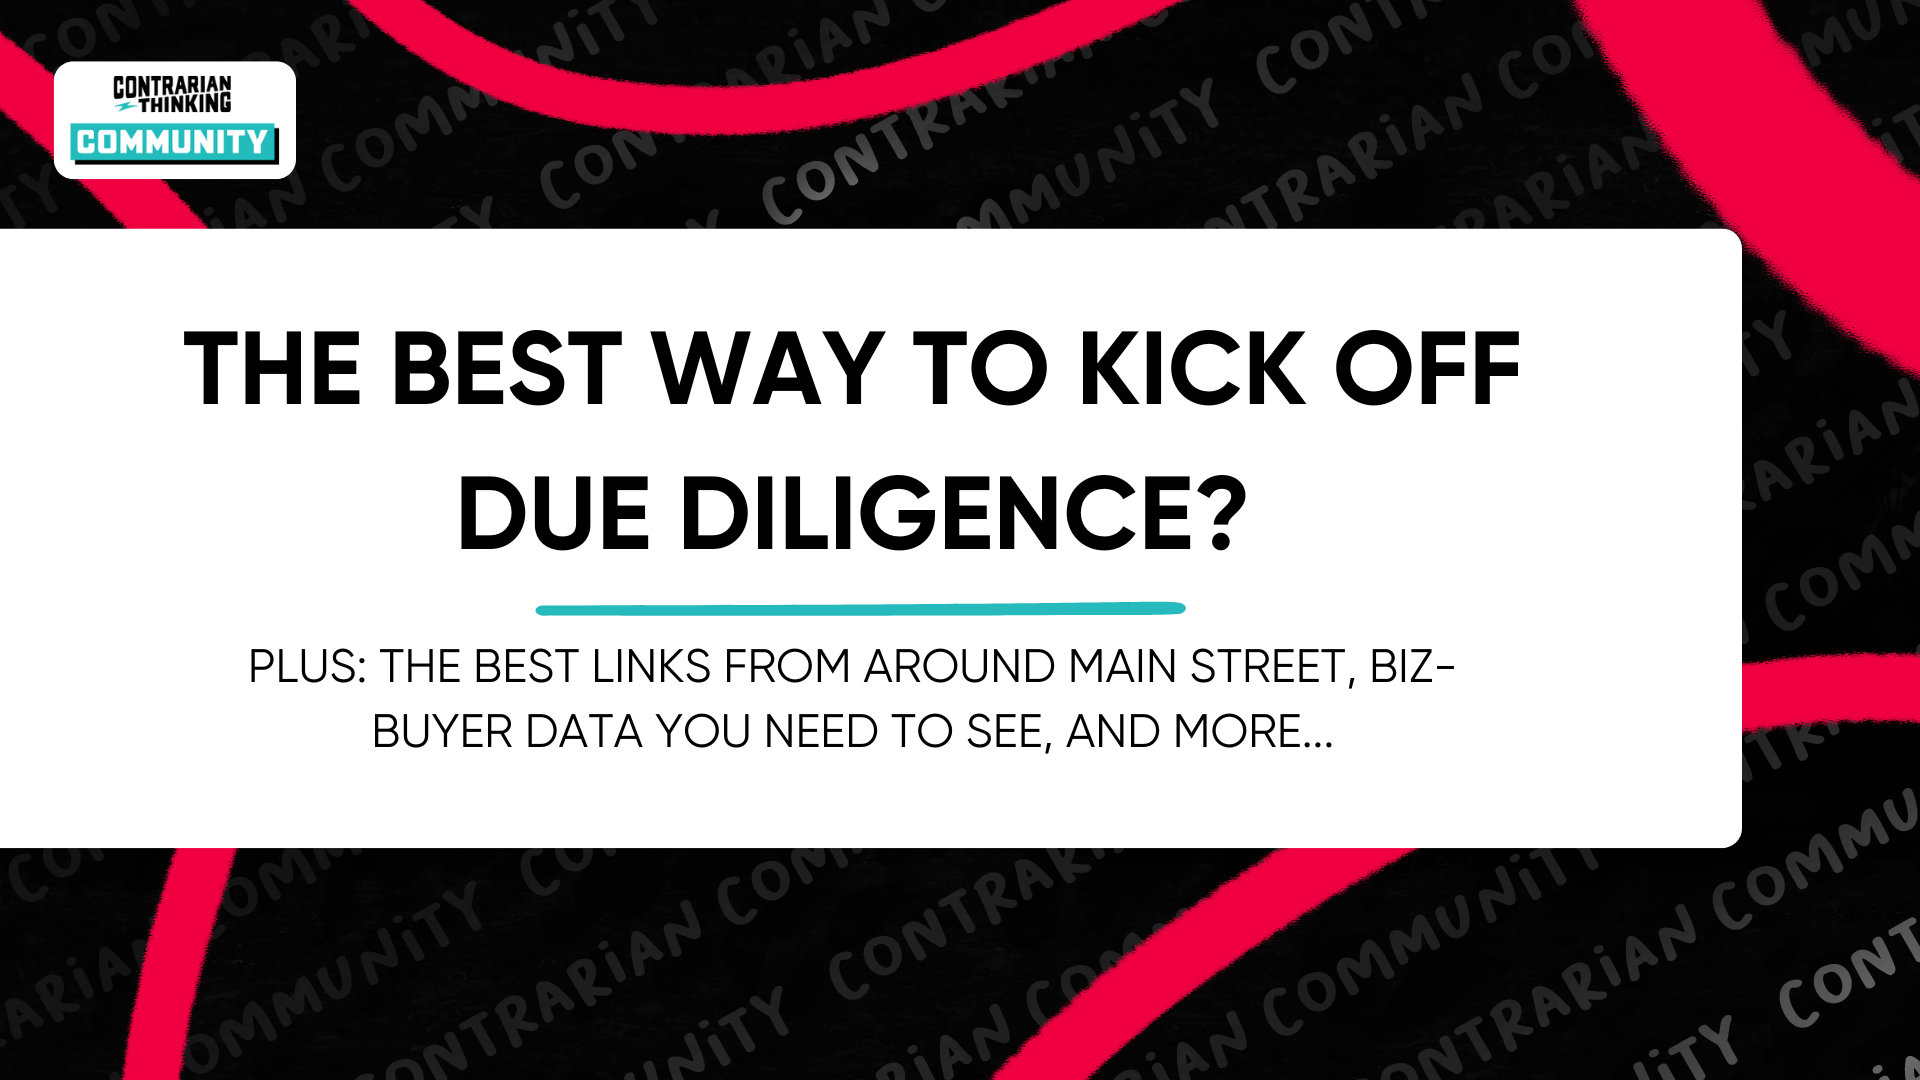 The best way to kick off due diligence